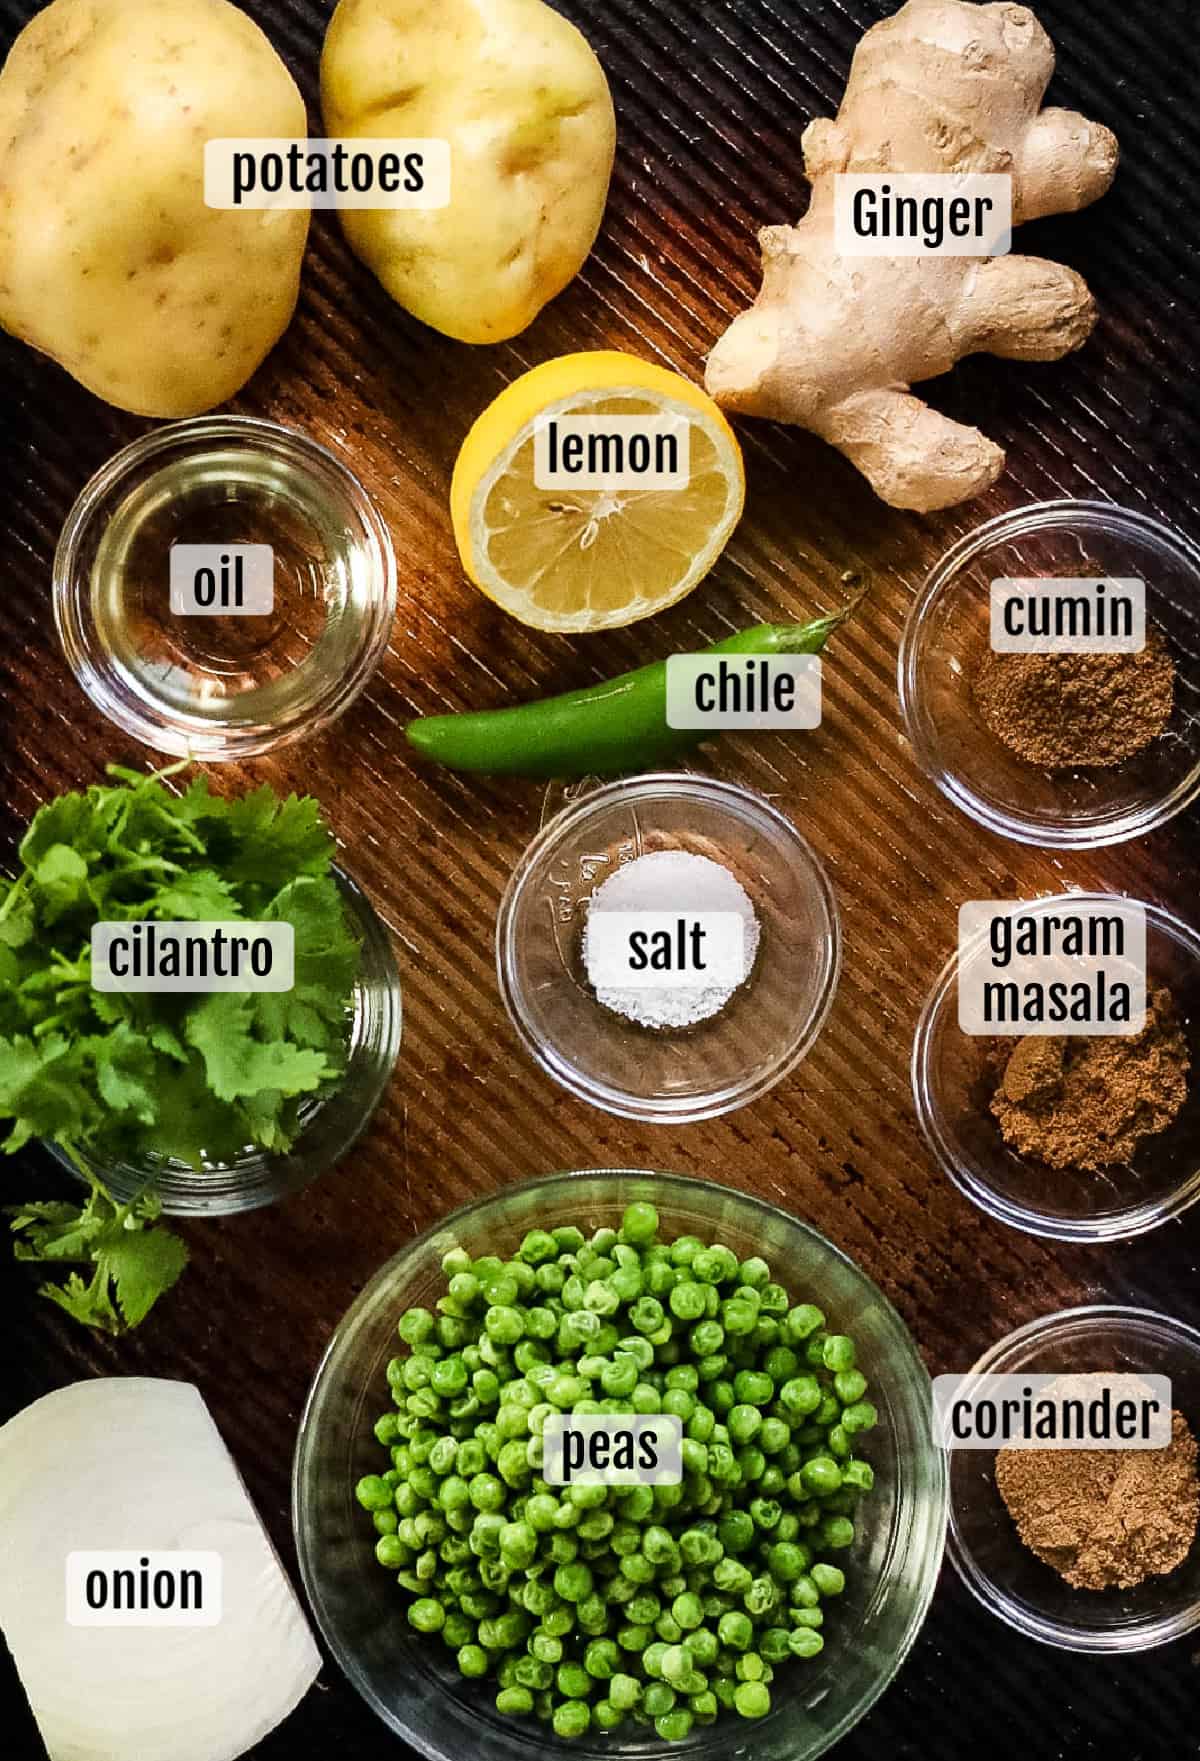 Overhead shot of the ingredients needed to make the potato and pea filling for fried samosas.